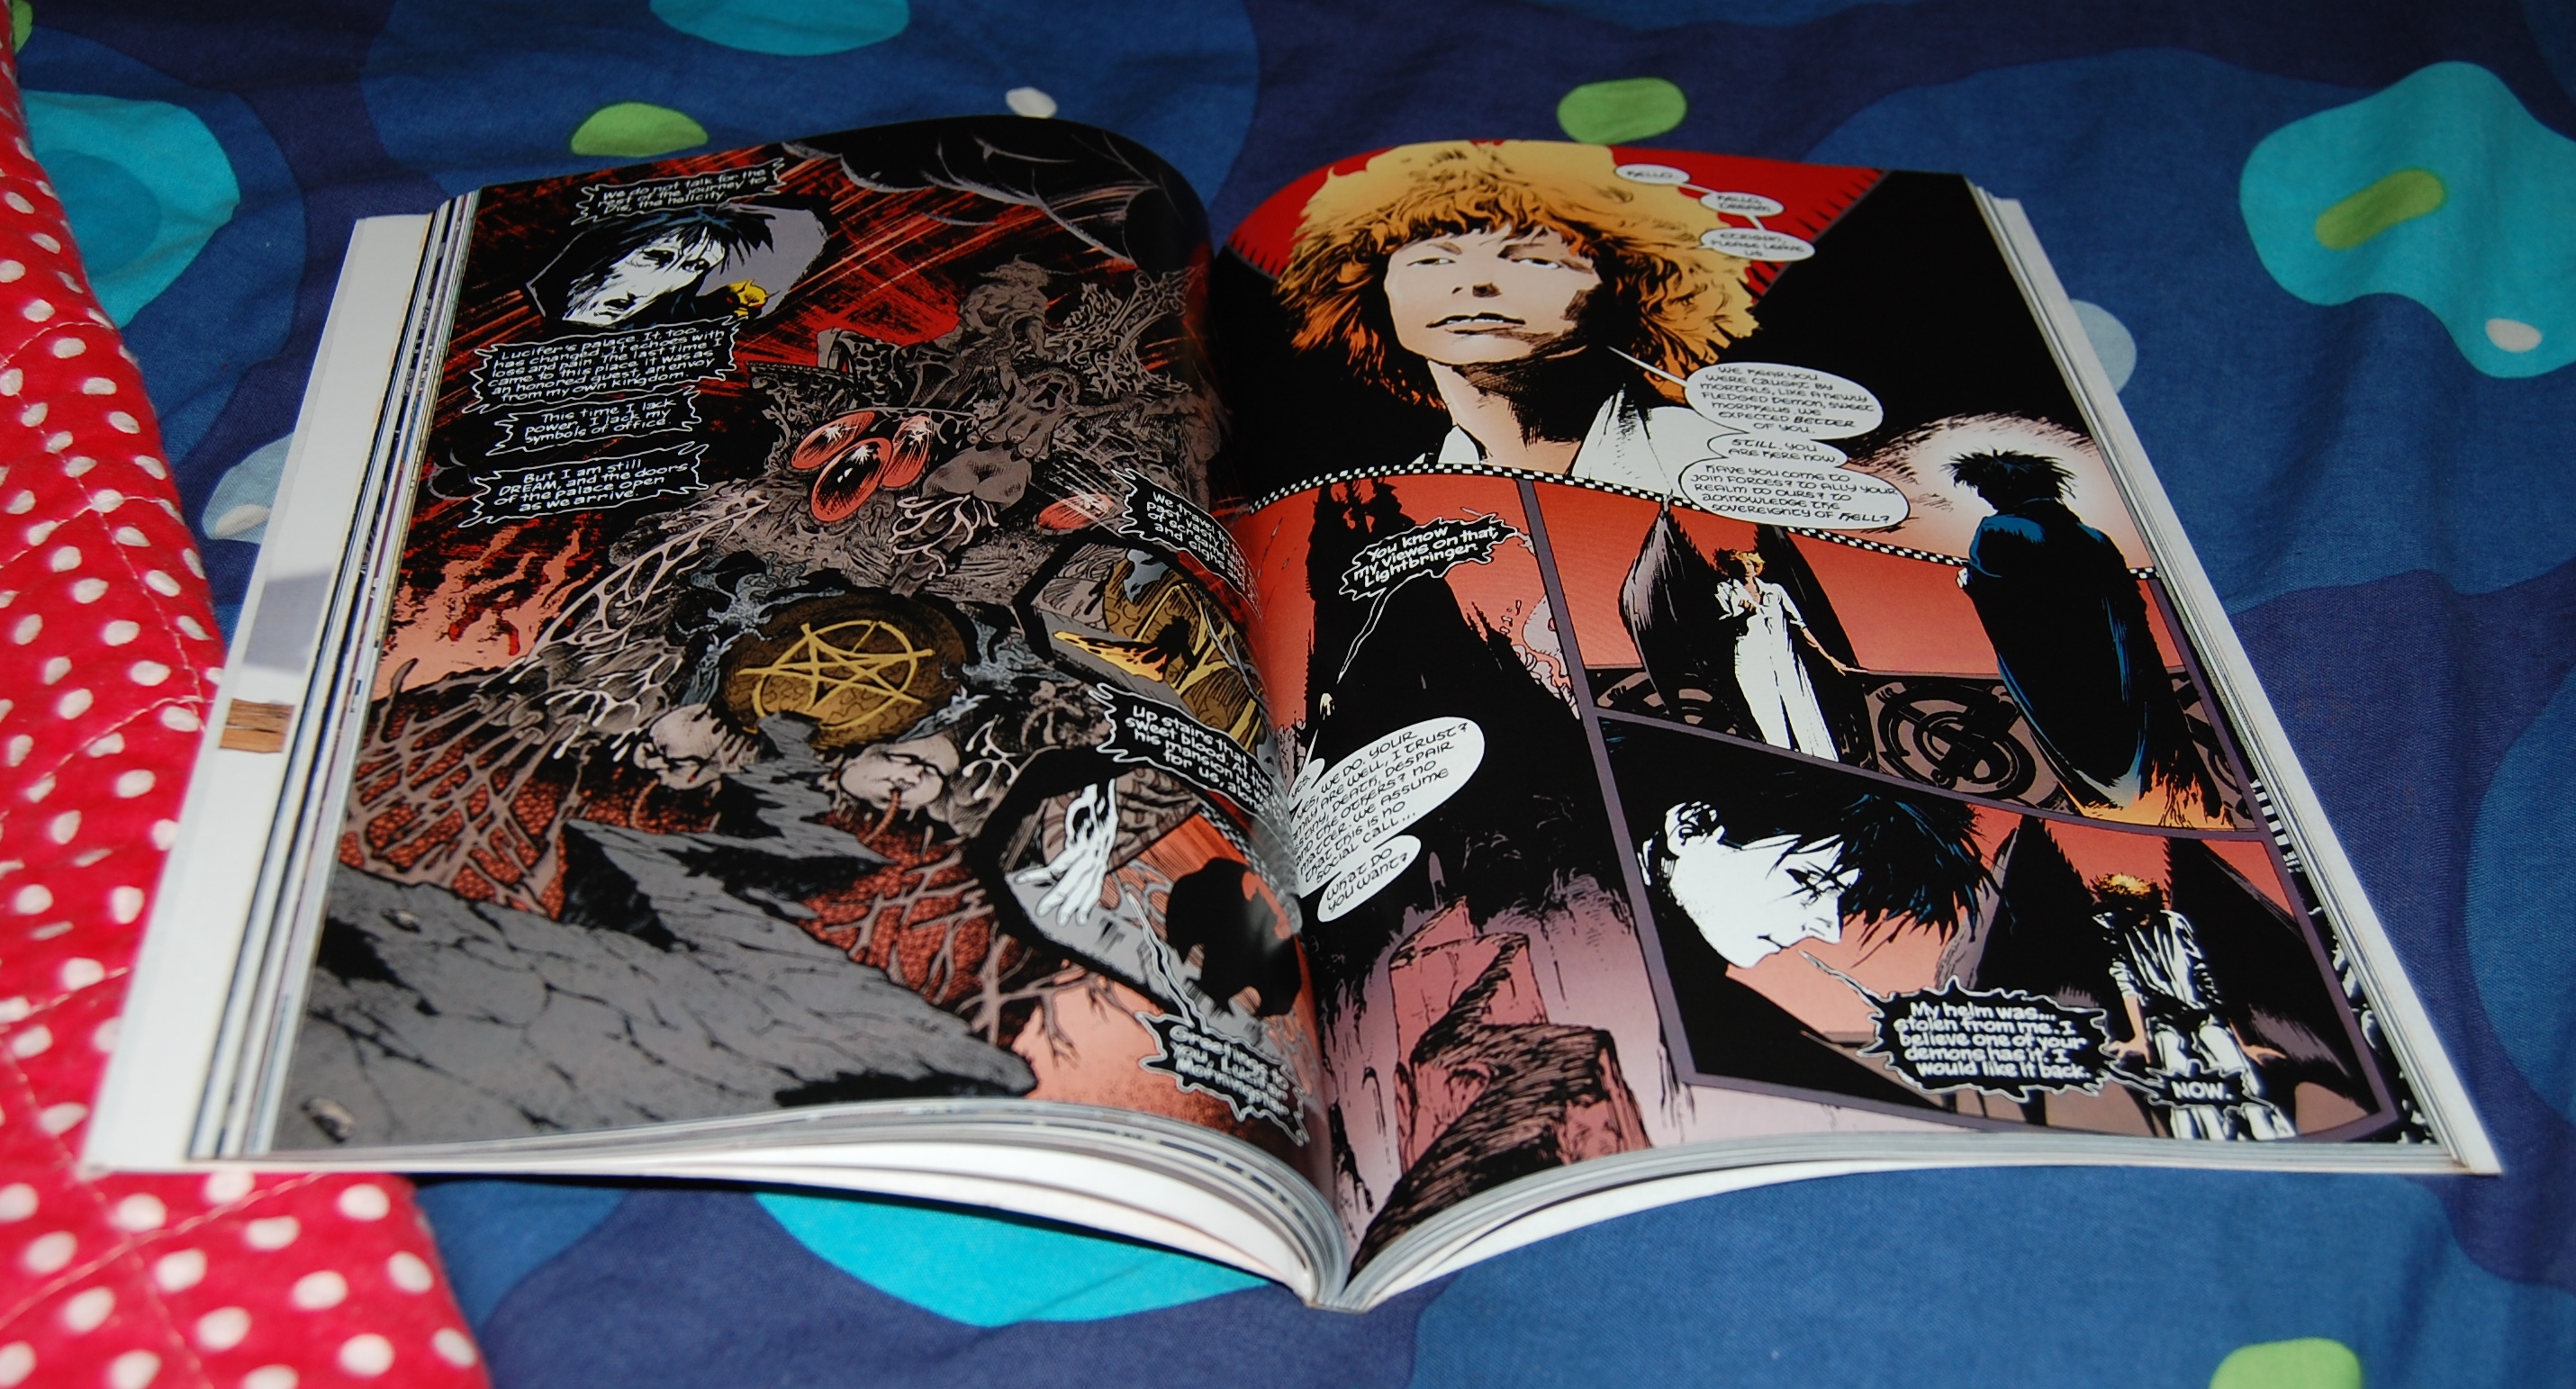 Amazing The Sandman: Preludes & Nocturnes Pictures & Backgrounds